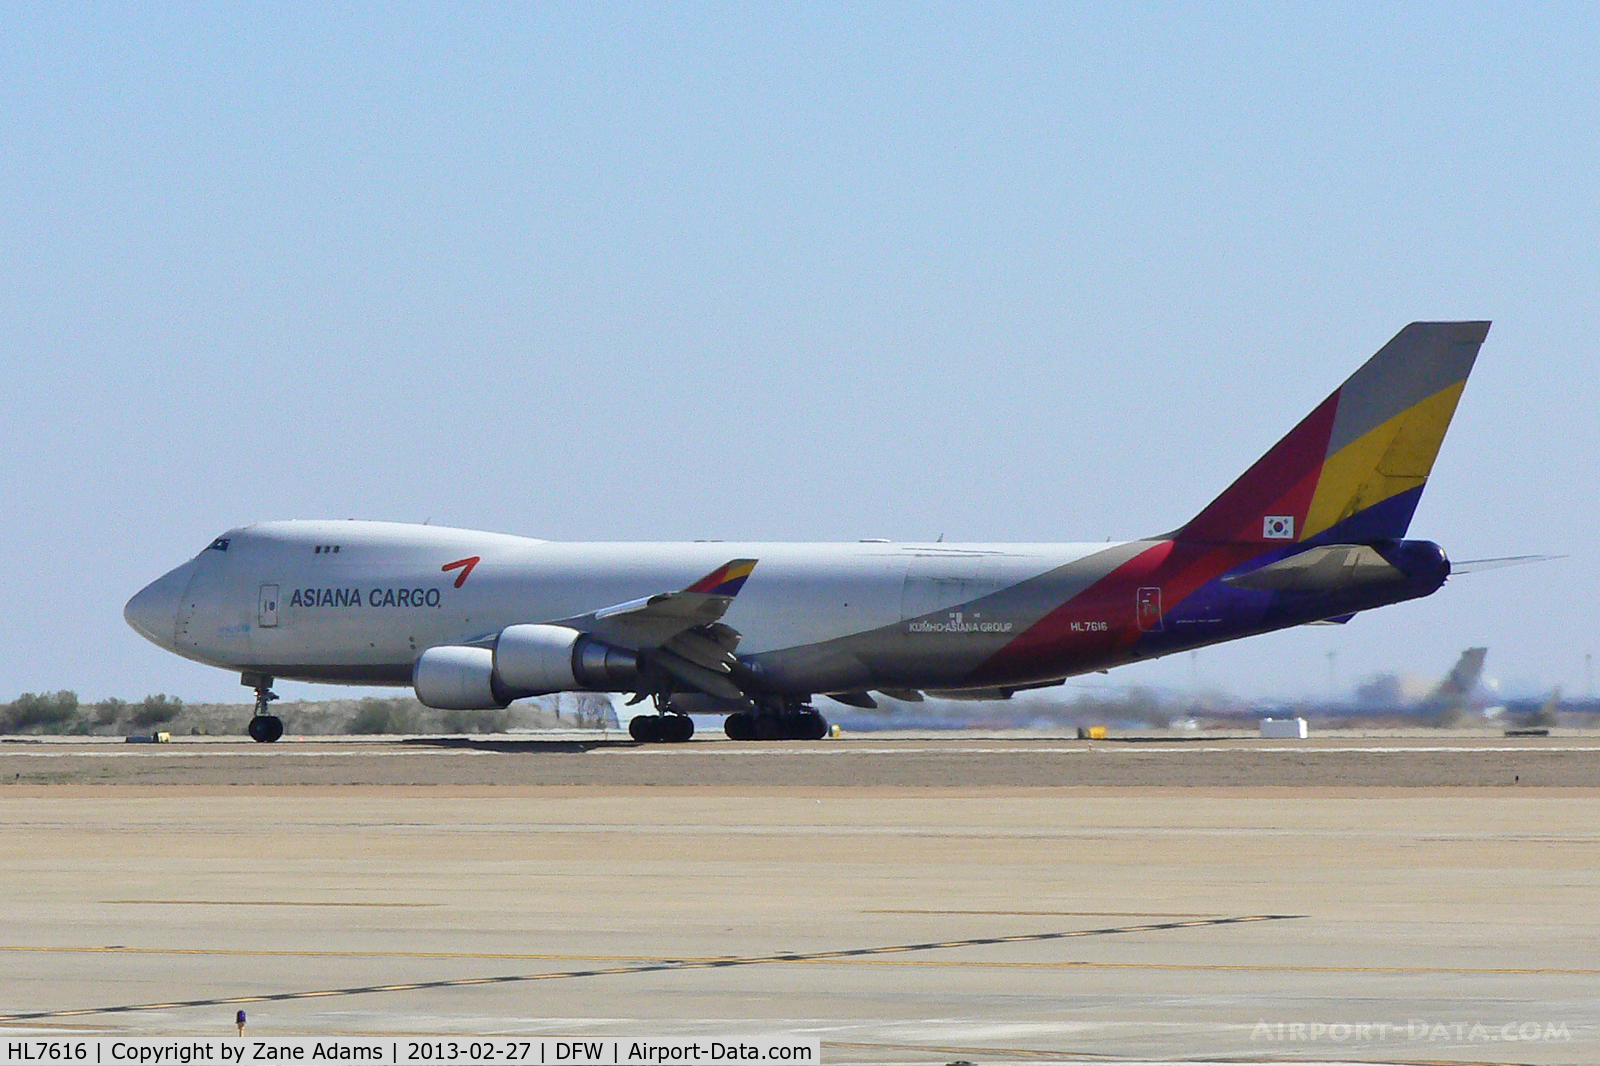 HL7616, 2004 Boeing 747-446F (SCD) C/N 33748, Asiana Cargo 747 at DFW Airport